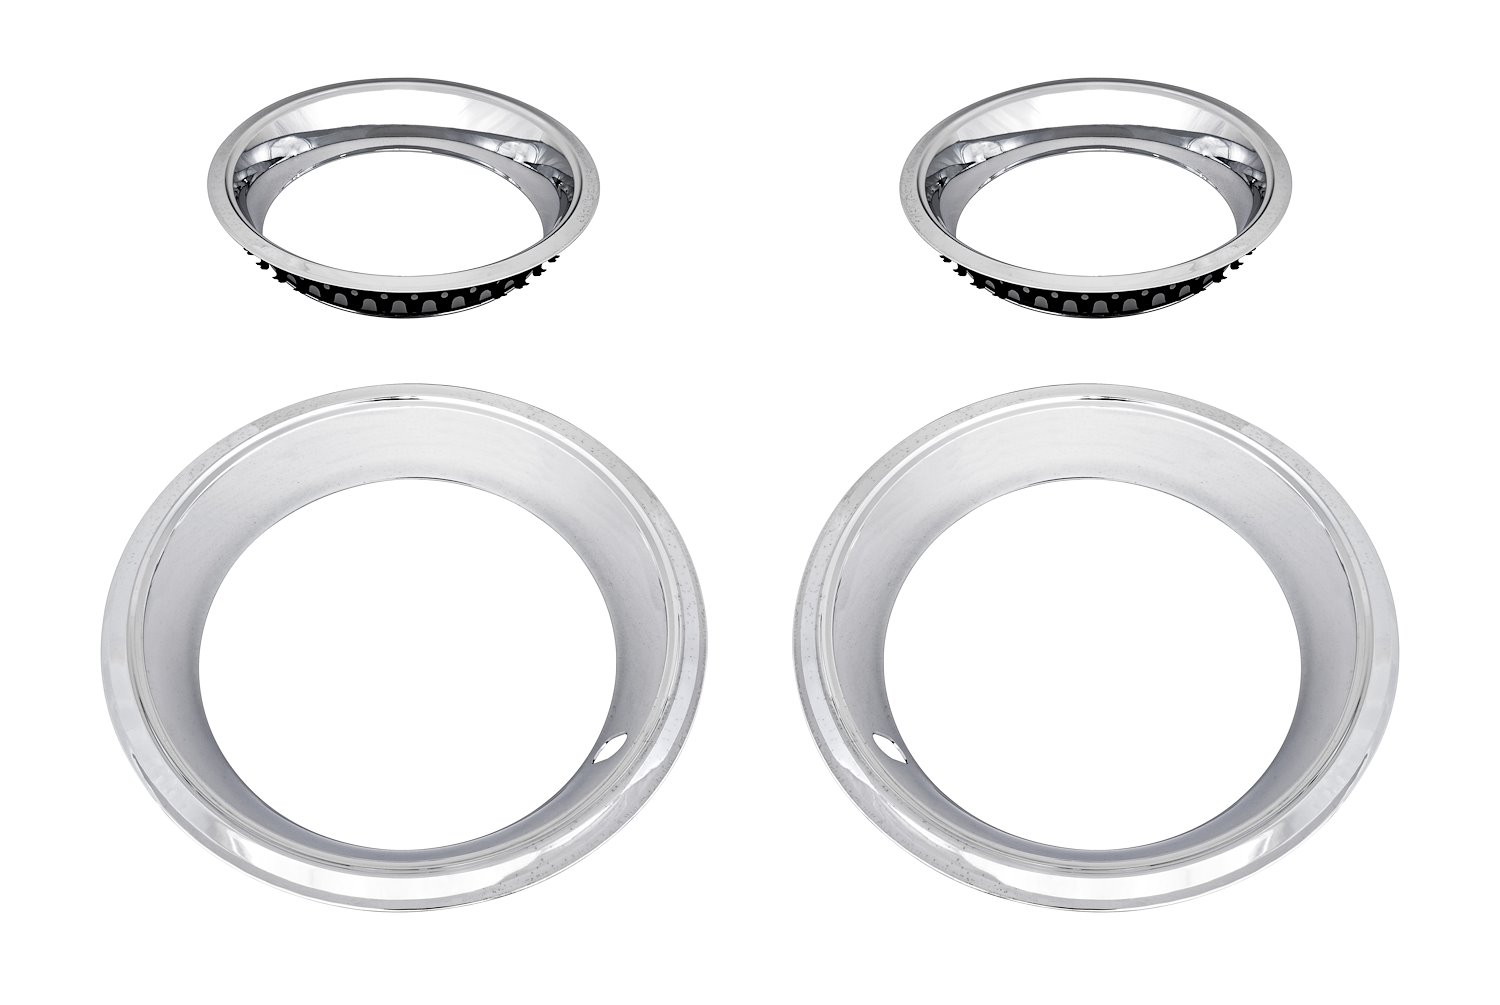 Deep Dish Trim Ring Set w/Stopped Edge for 14 in. x 7 in. Wheels [2.875 in. D x 3 in. W]